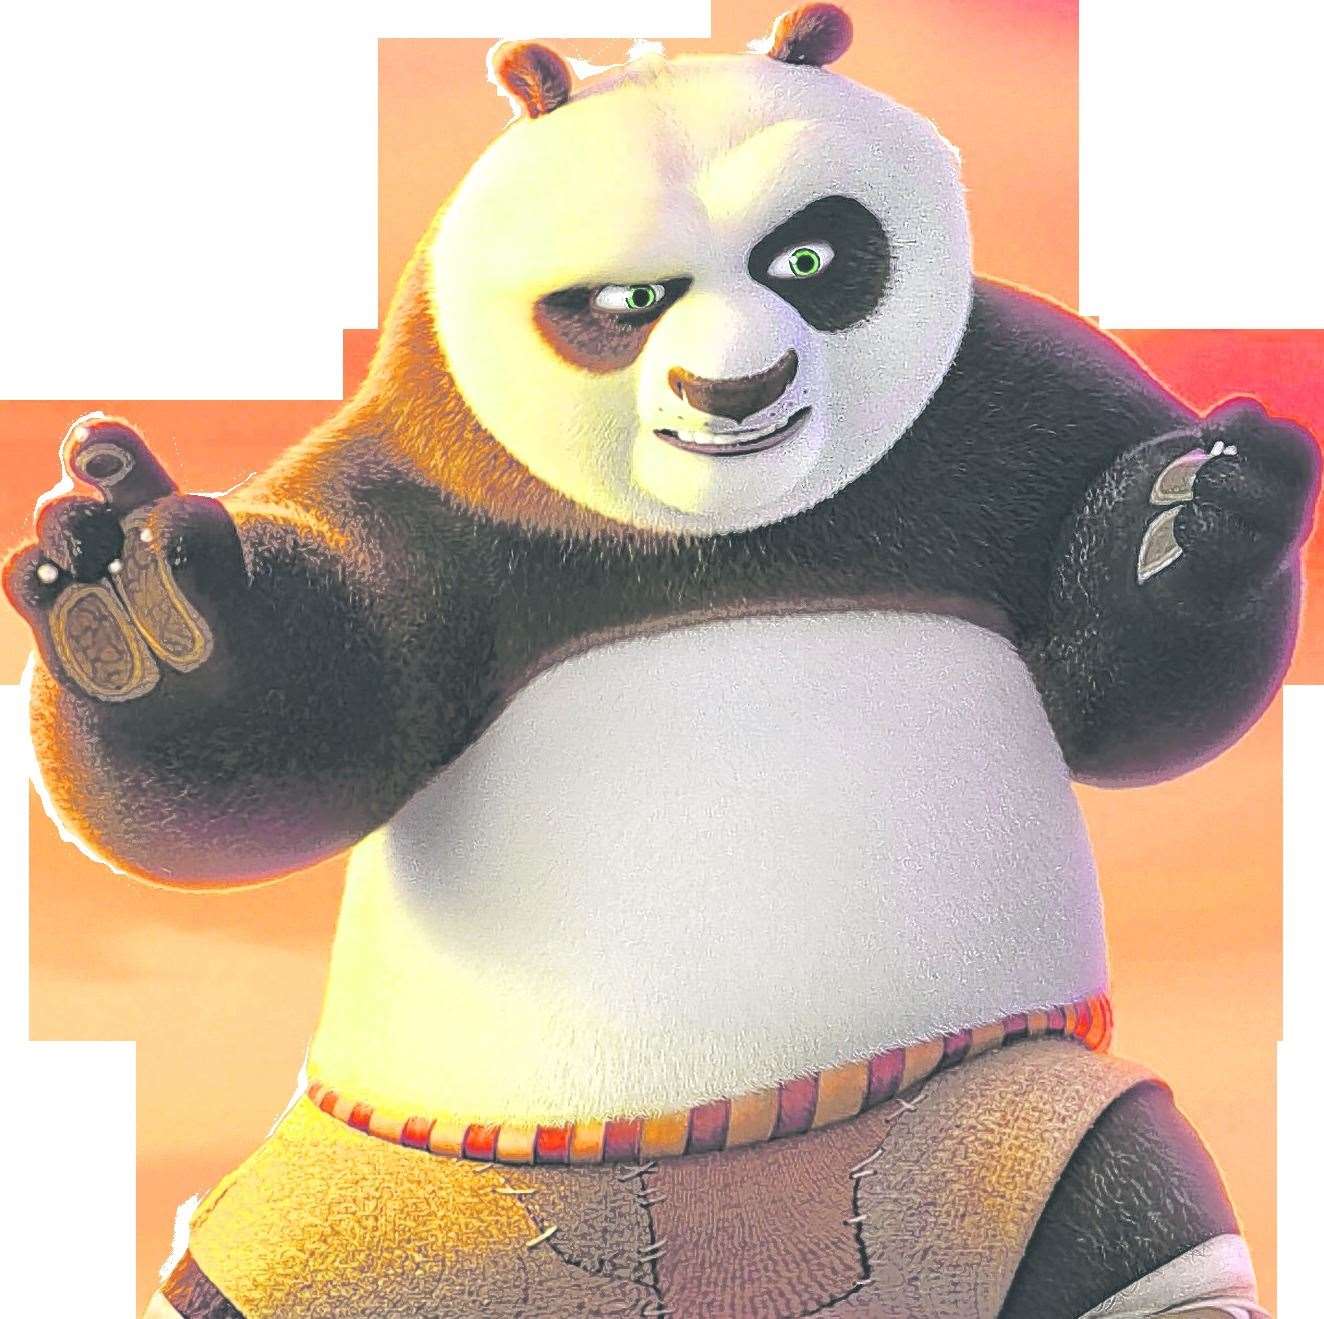 Kung Fu Panda will also be shown this summer Picture: Fox UK